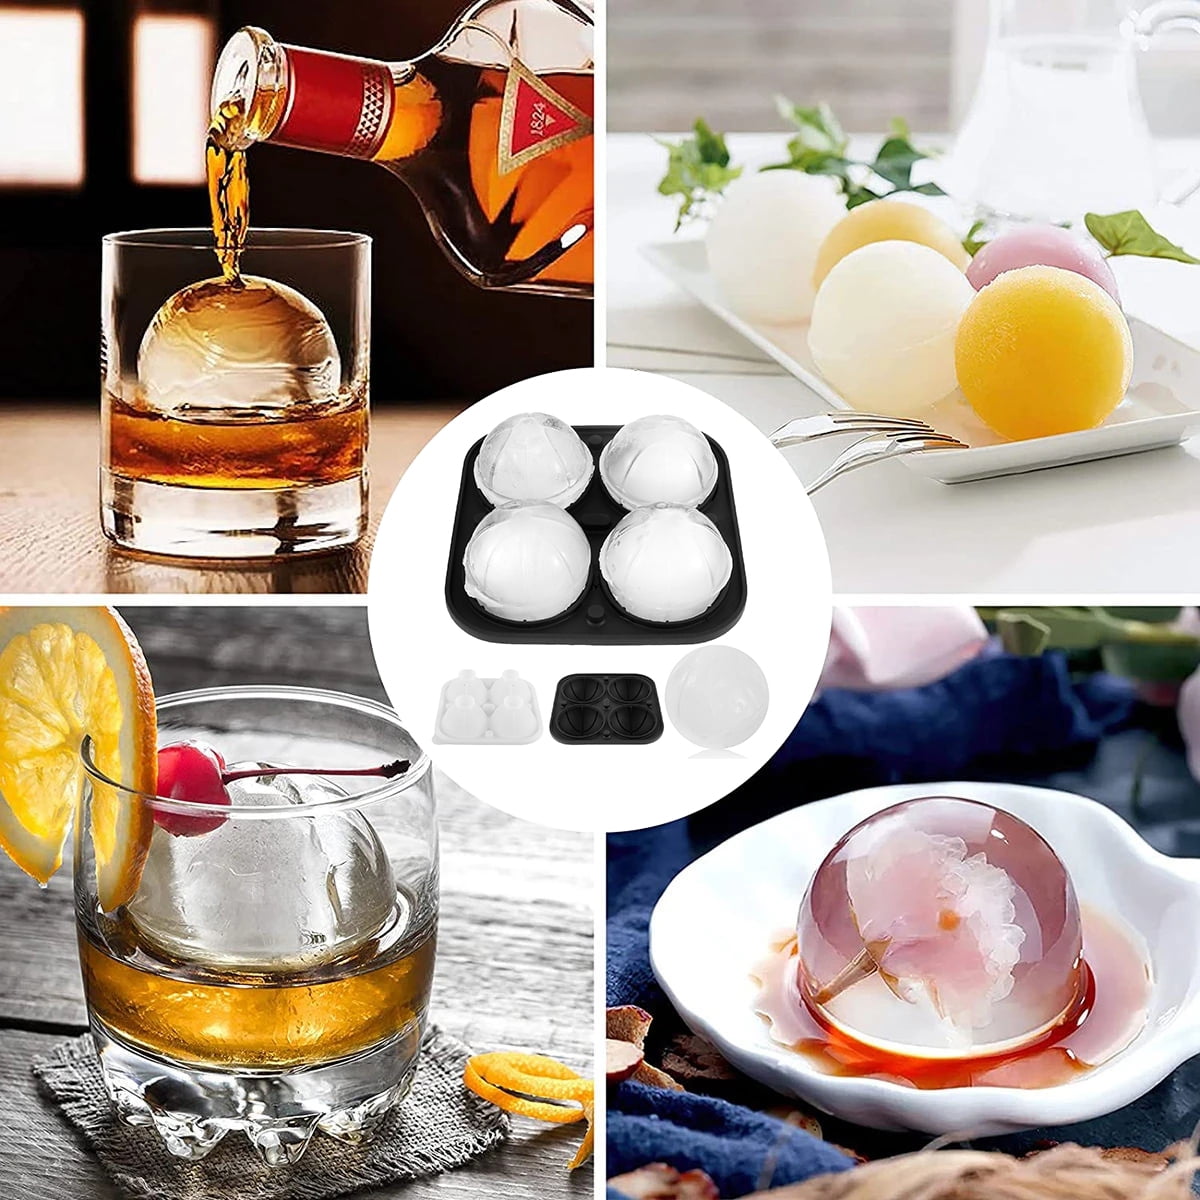 Cocktail Whiskey Ice Ball Maker Ice Cube Tray 4 Large Silicone Ice Molds  Maker Kitchen Bar Accessories